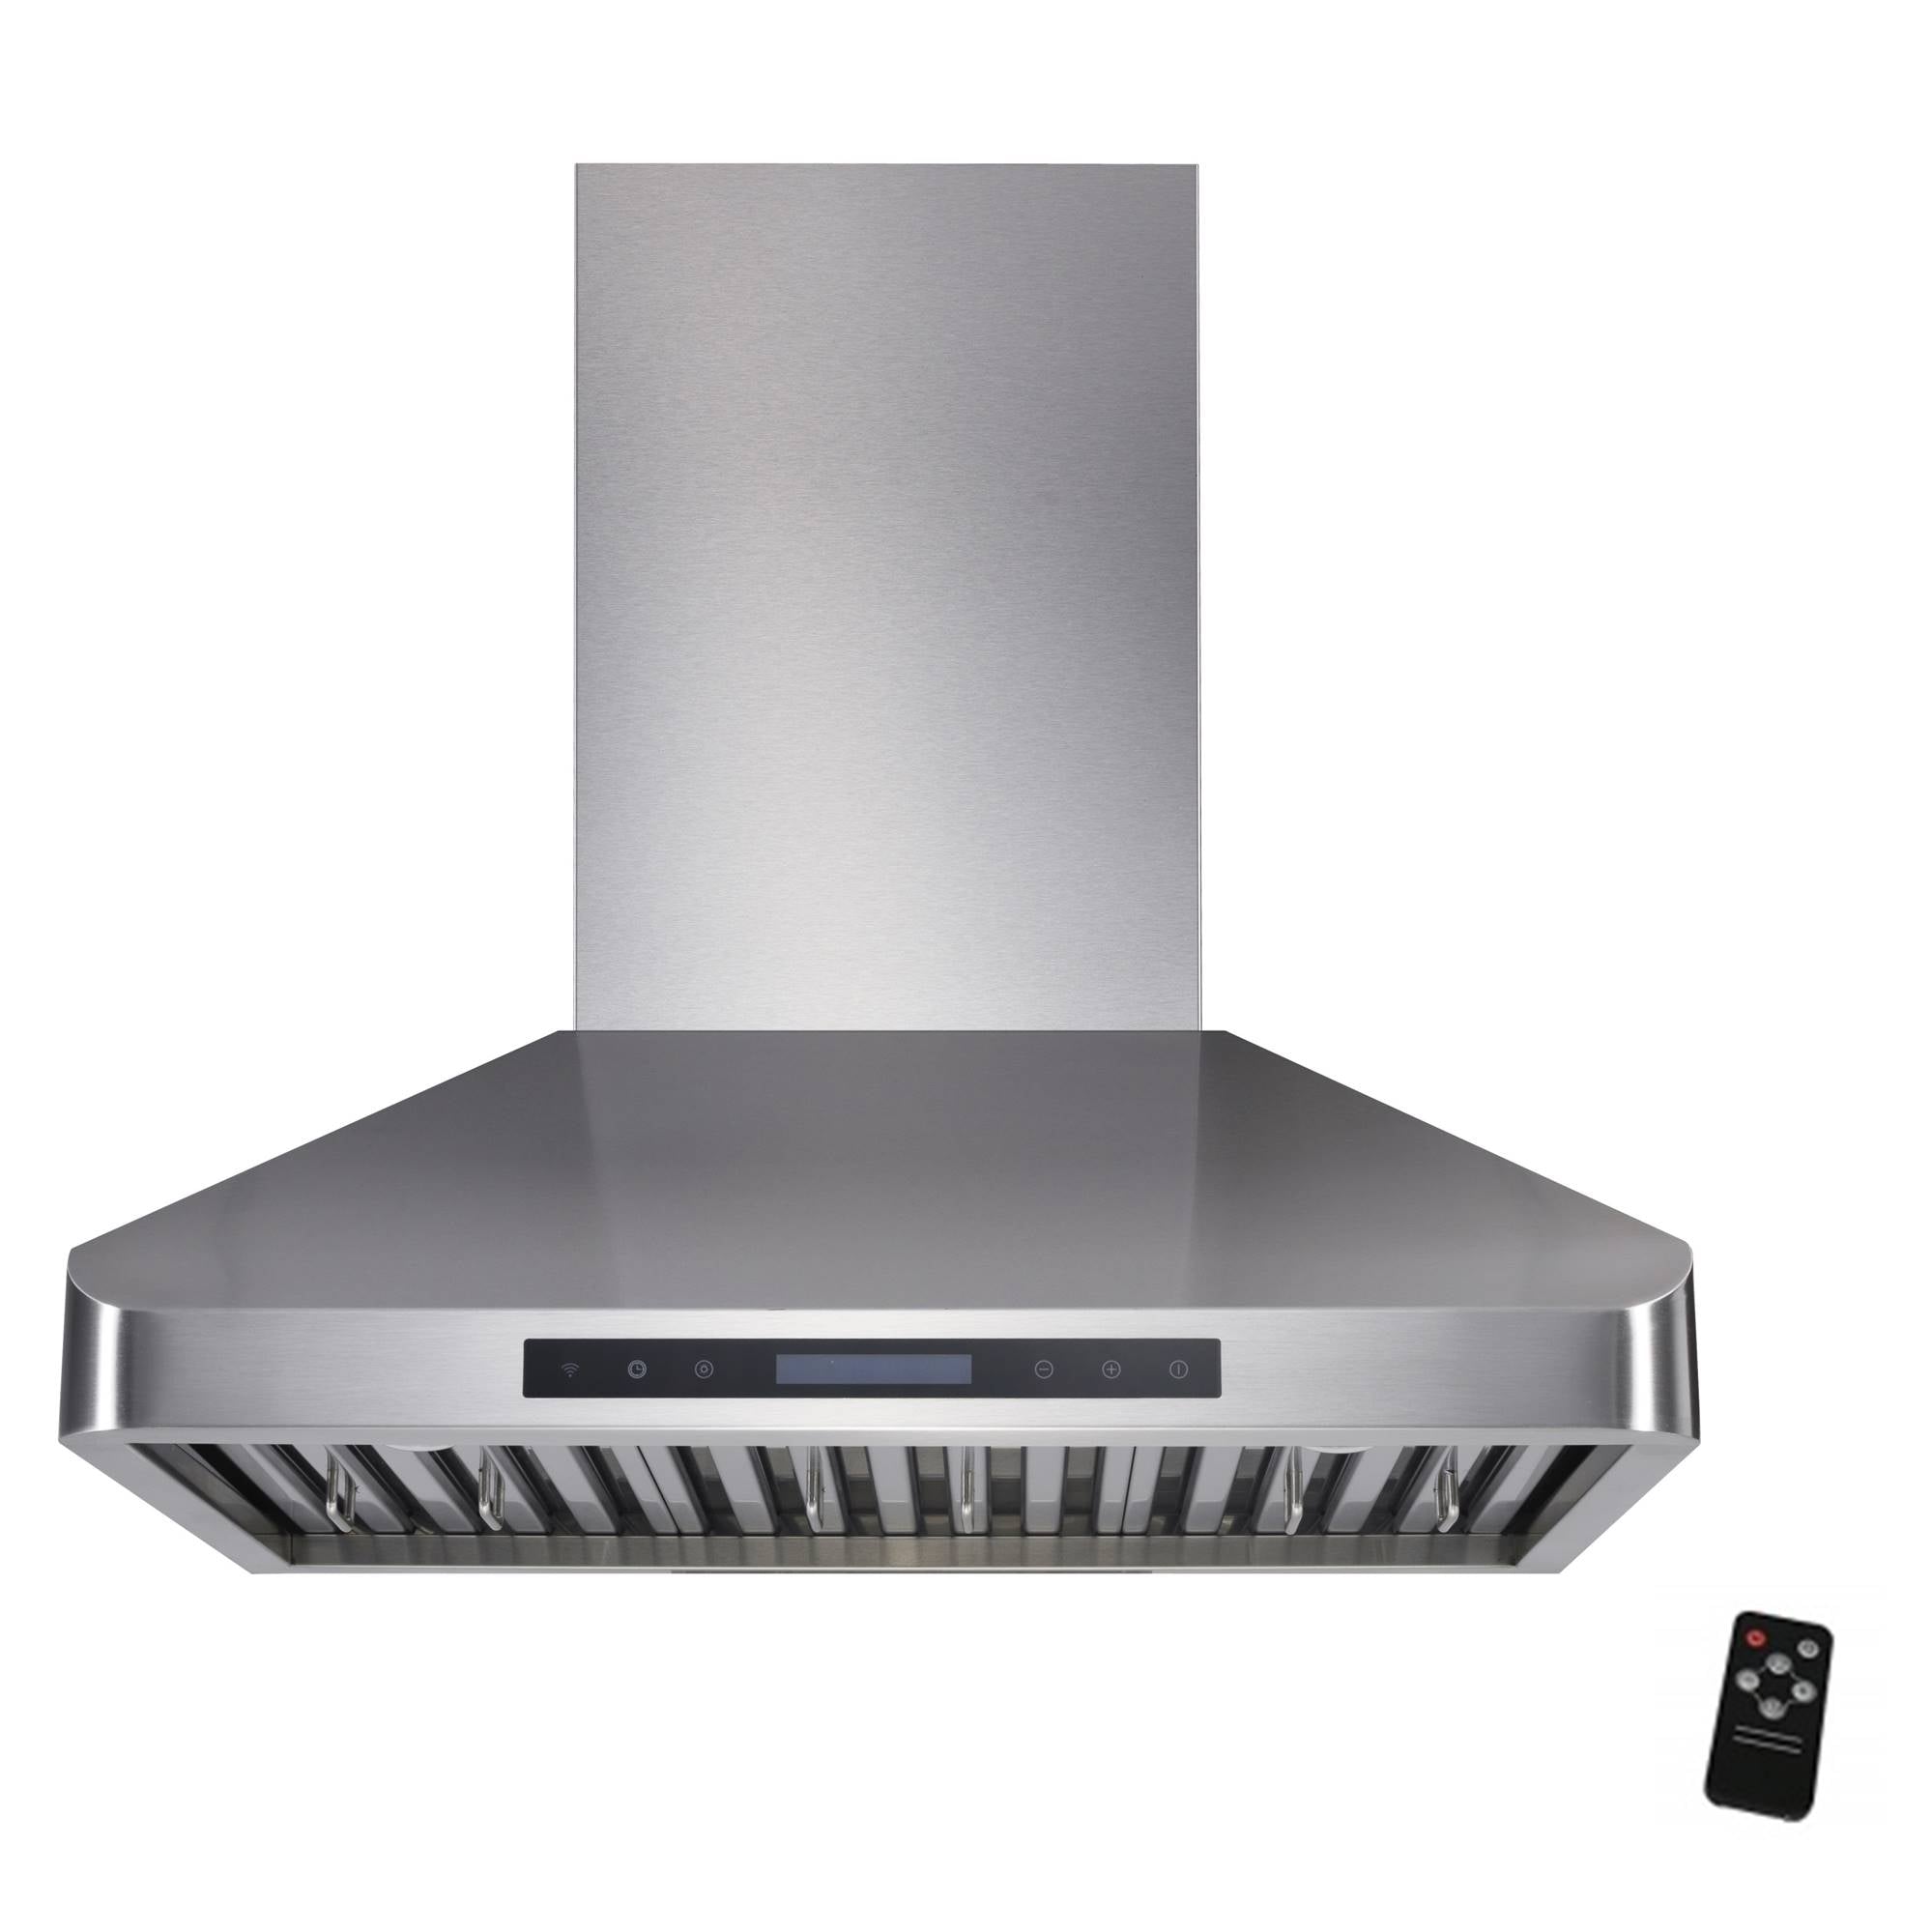 Awoco RH-WT-30XL 56-1/2"H Stainless Steel Range Hood 4 Speeds, 6” Round Top Vent 900CFM 2 LED Lights & Remote Control (30" Wall Mount XL)